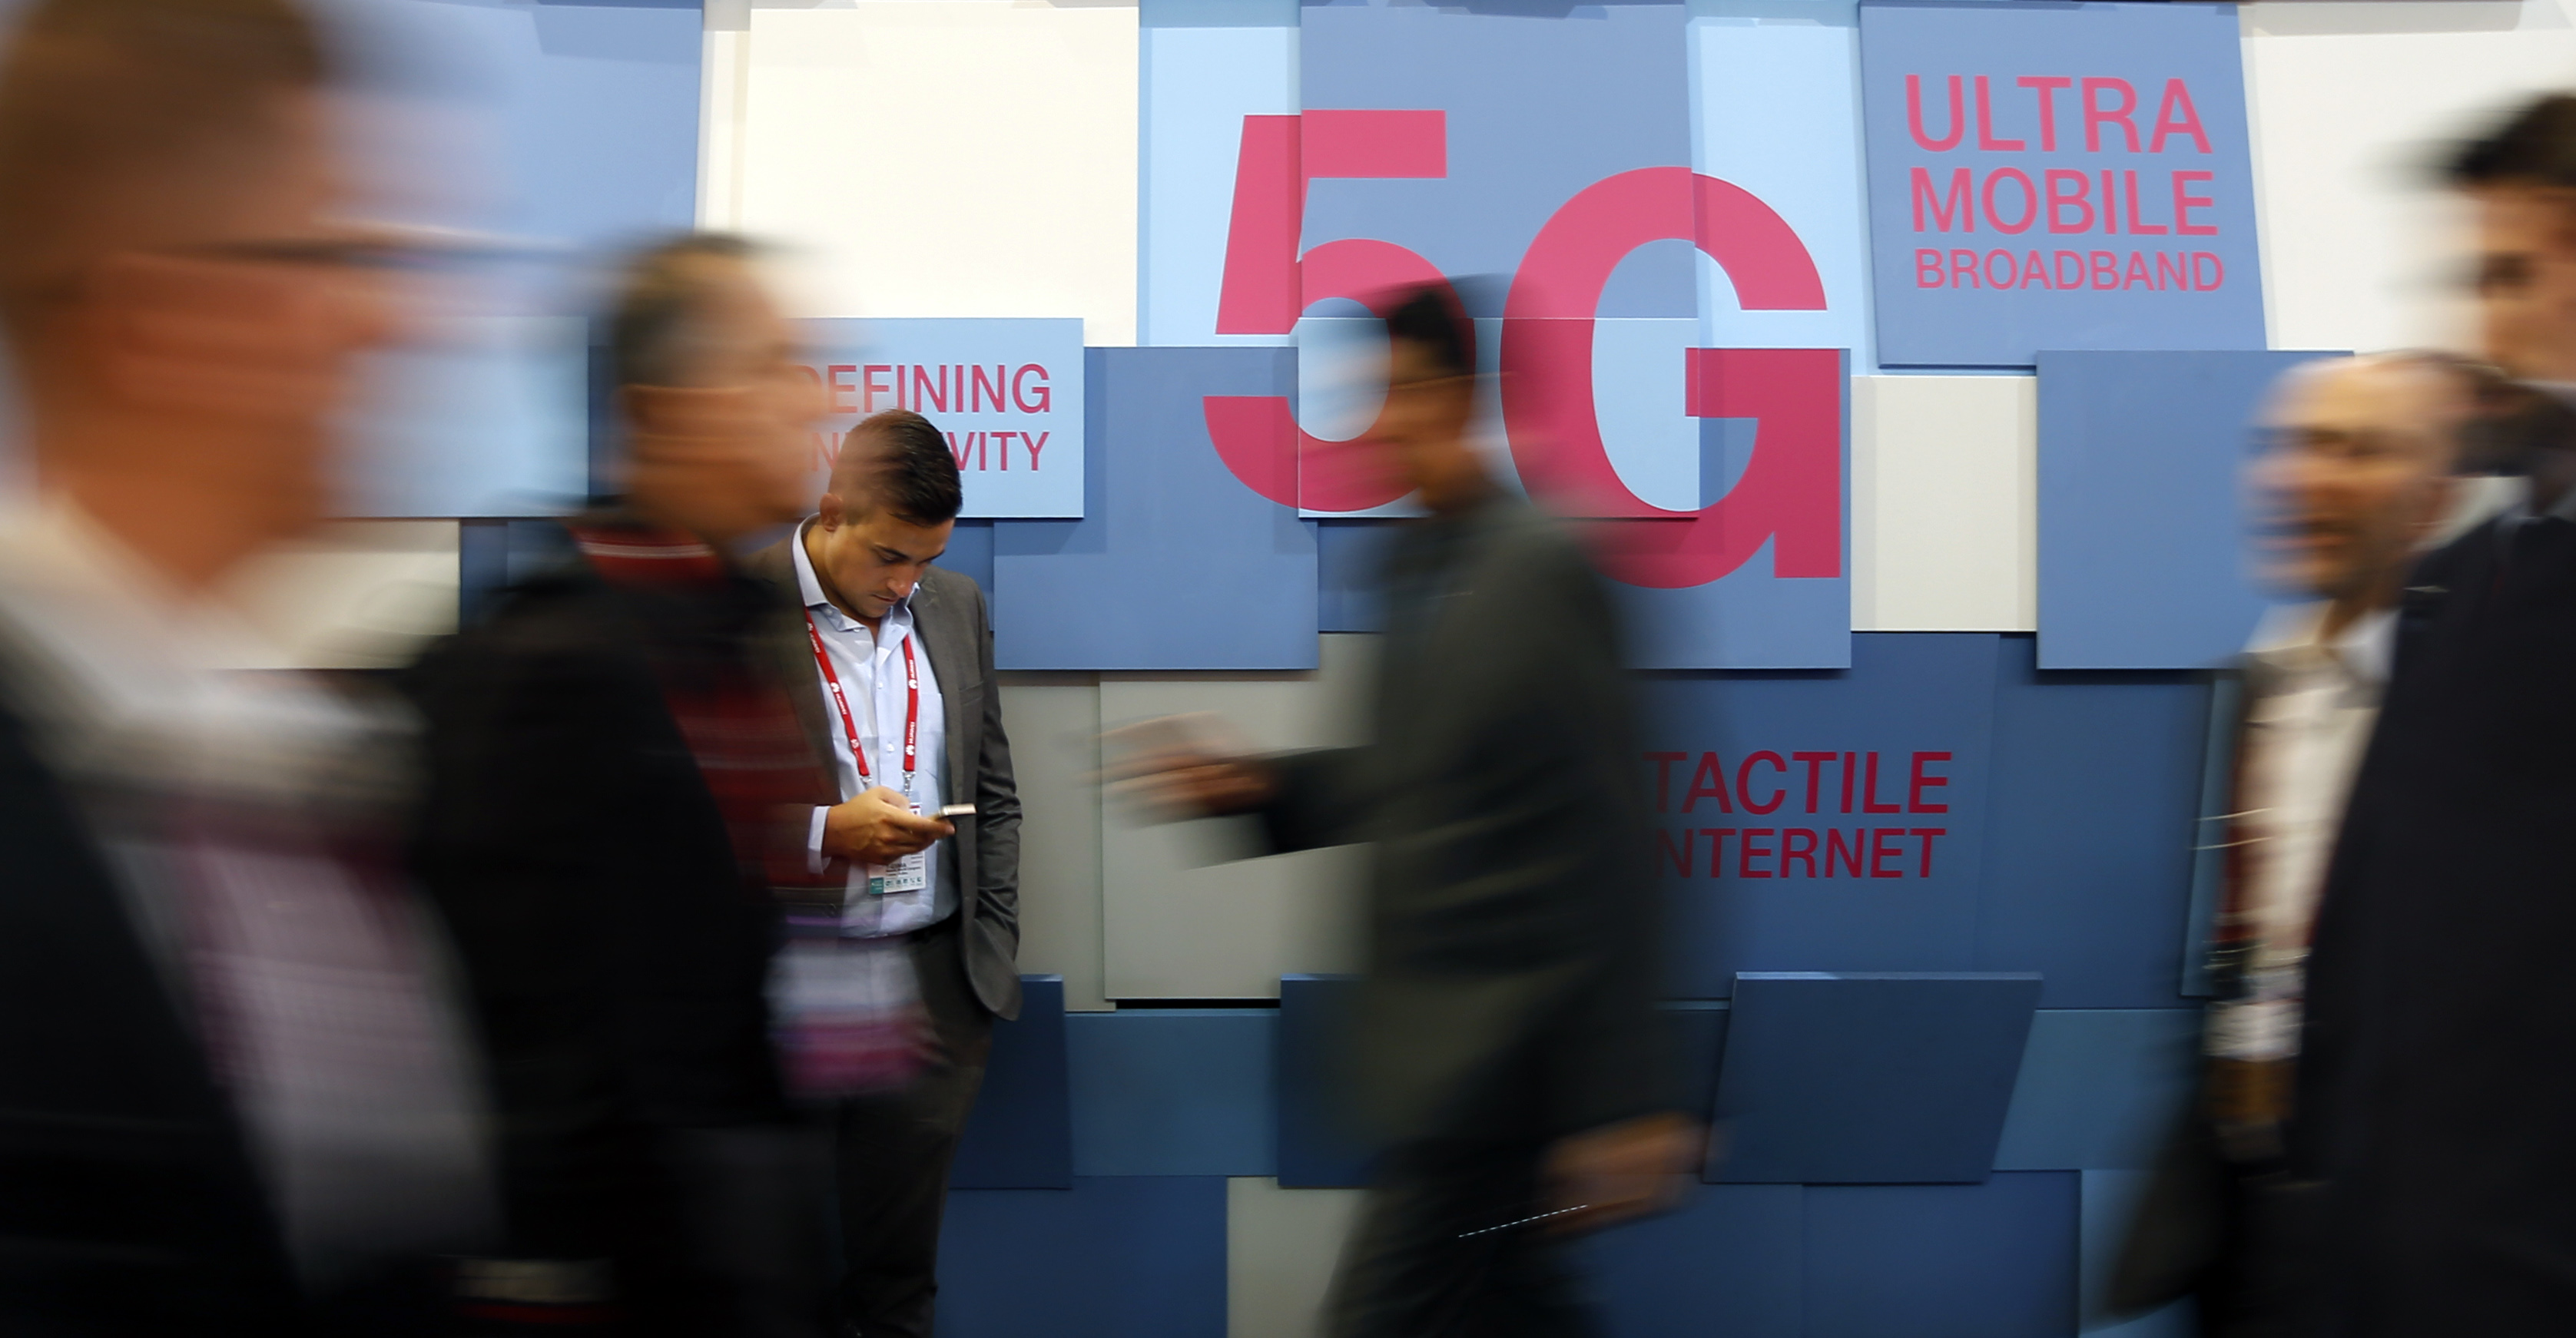 telecoms-frequence-5g-telephonie-mobile-world-congress